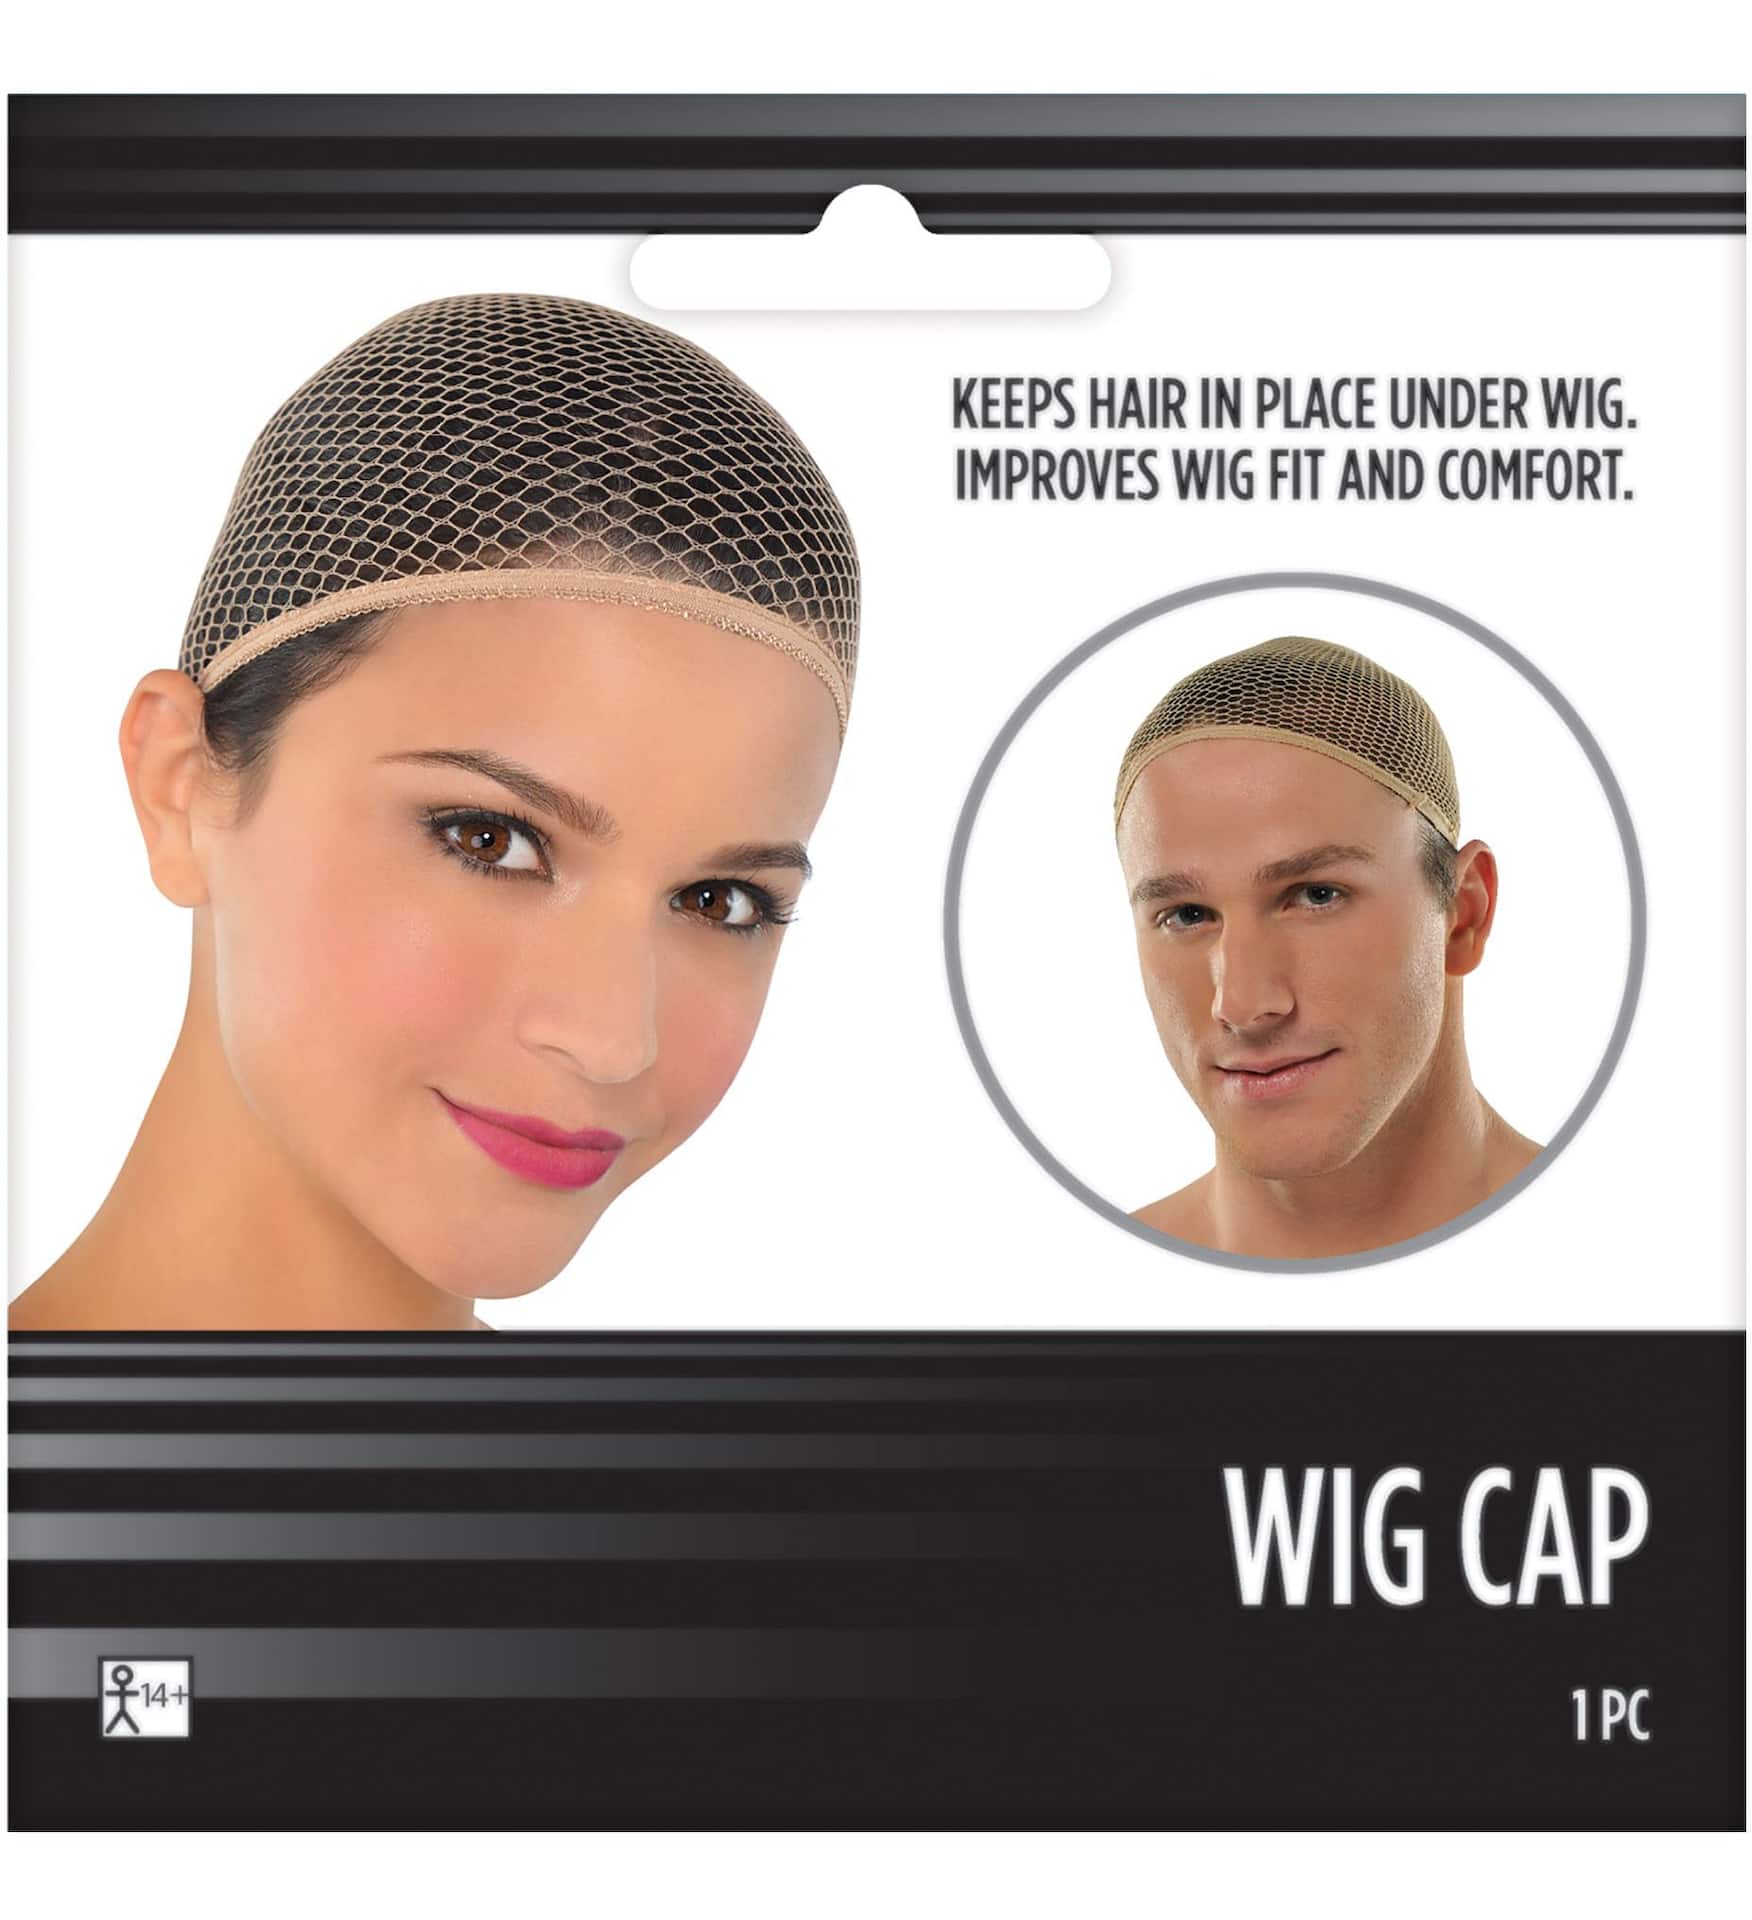 Black Hair Net Wig Cap For Weaving - Size Breathable Inflatable